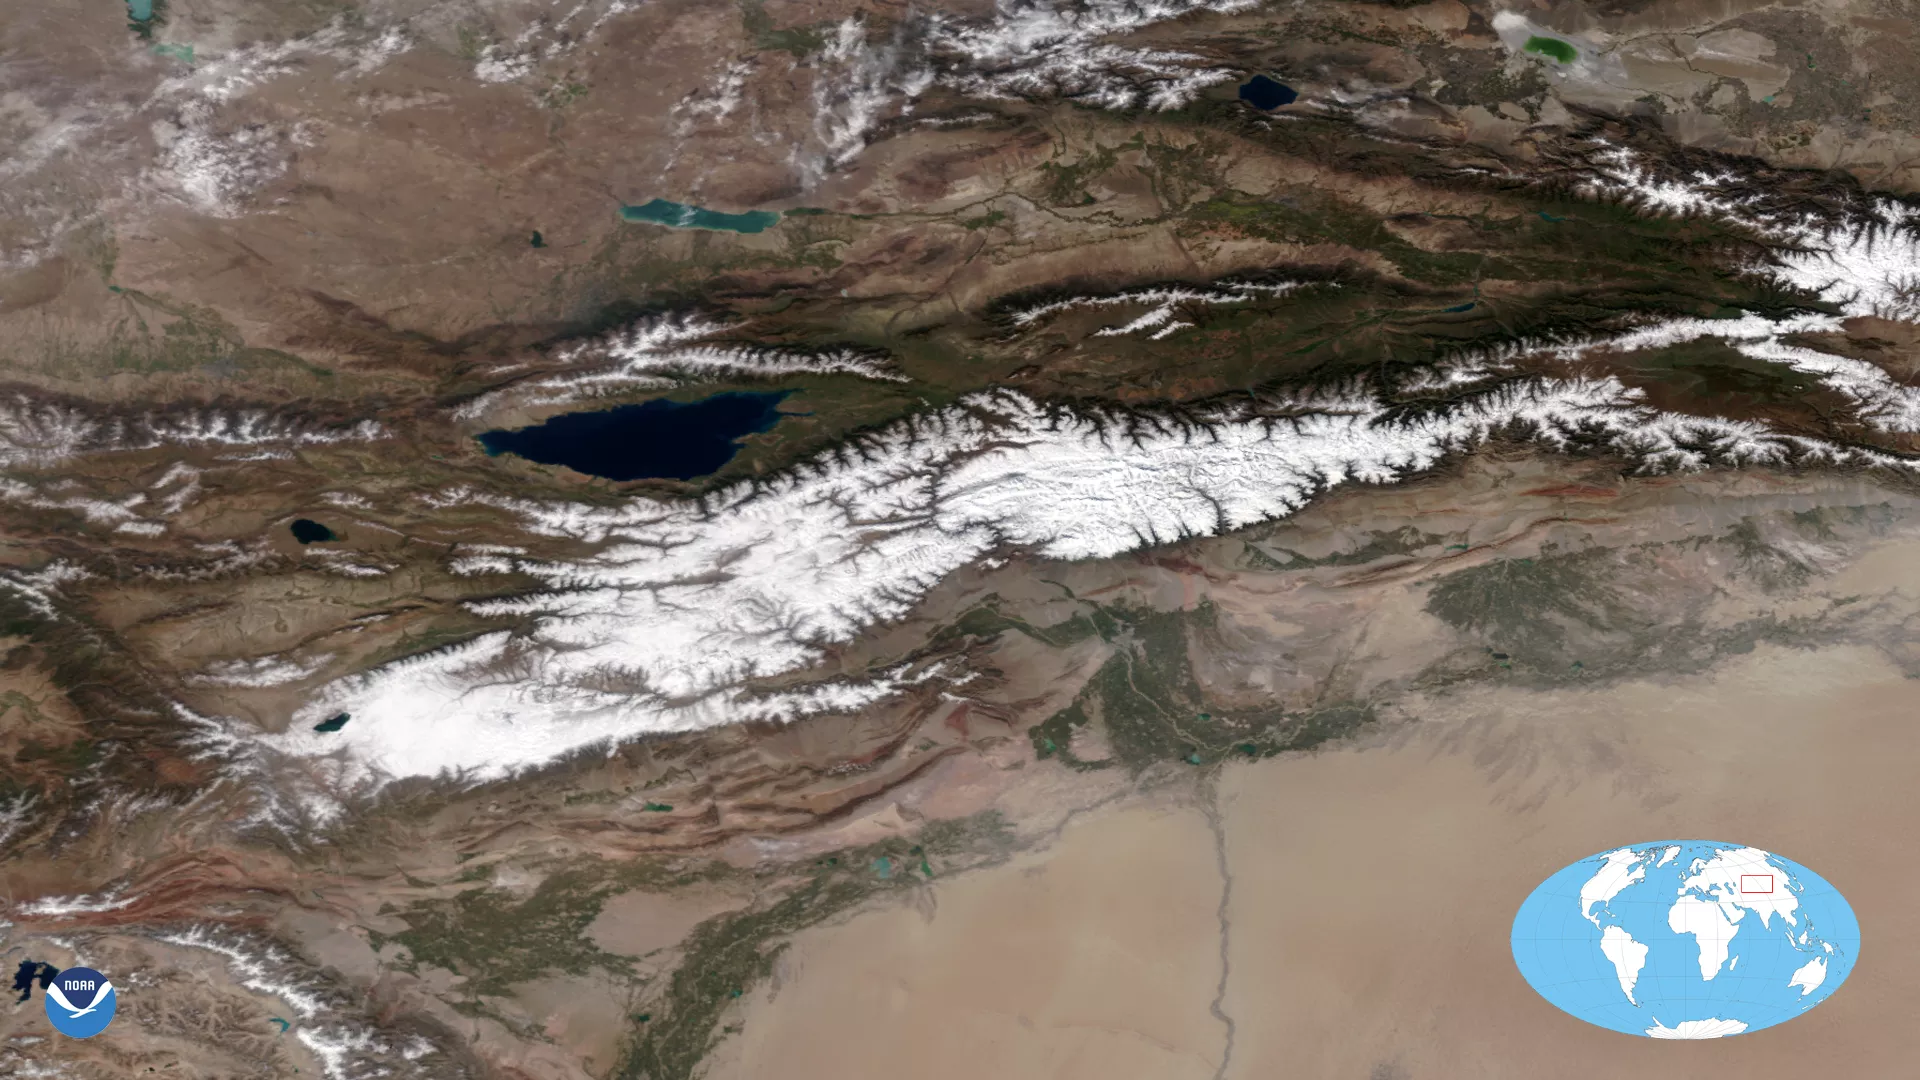 Imagery of the Tian Shan Mountains in China, NOAA-20 satellite, Nov. 2020. An inset shows location on the globe.